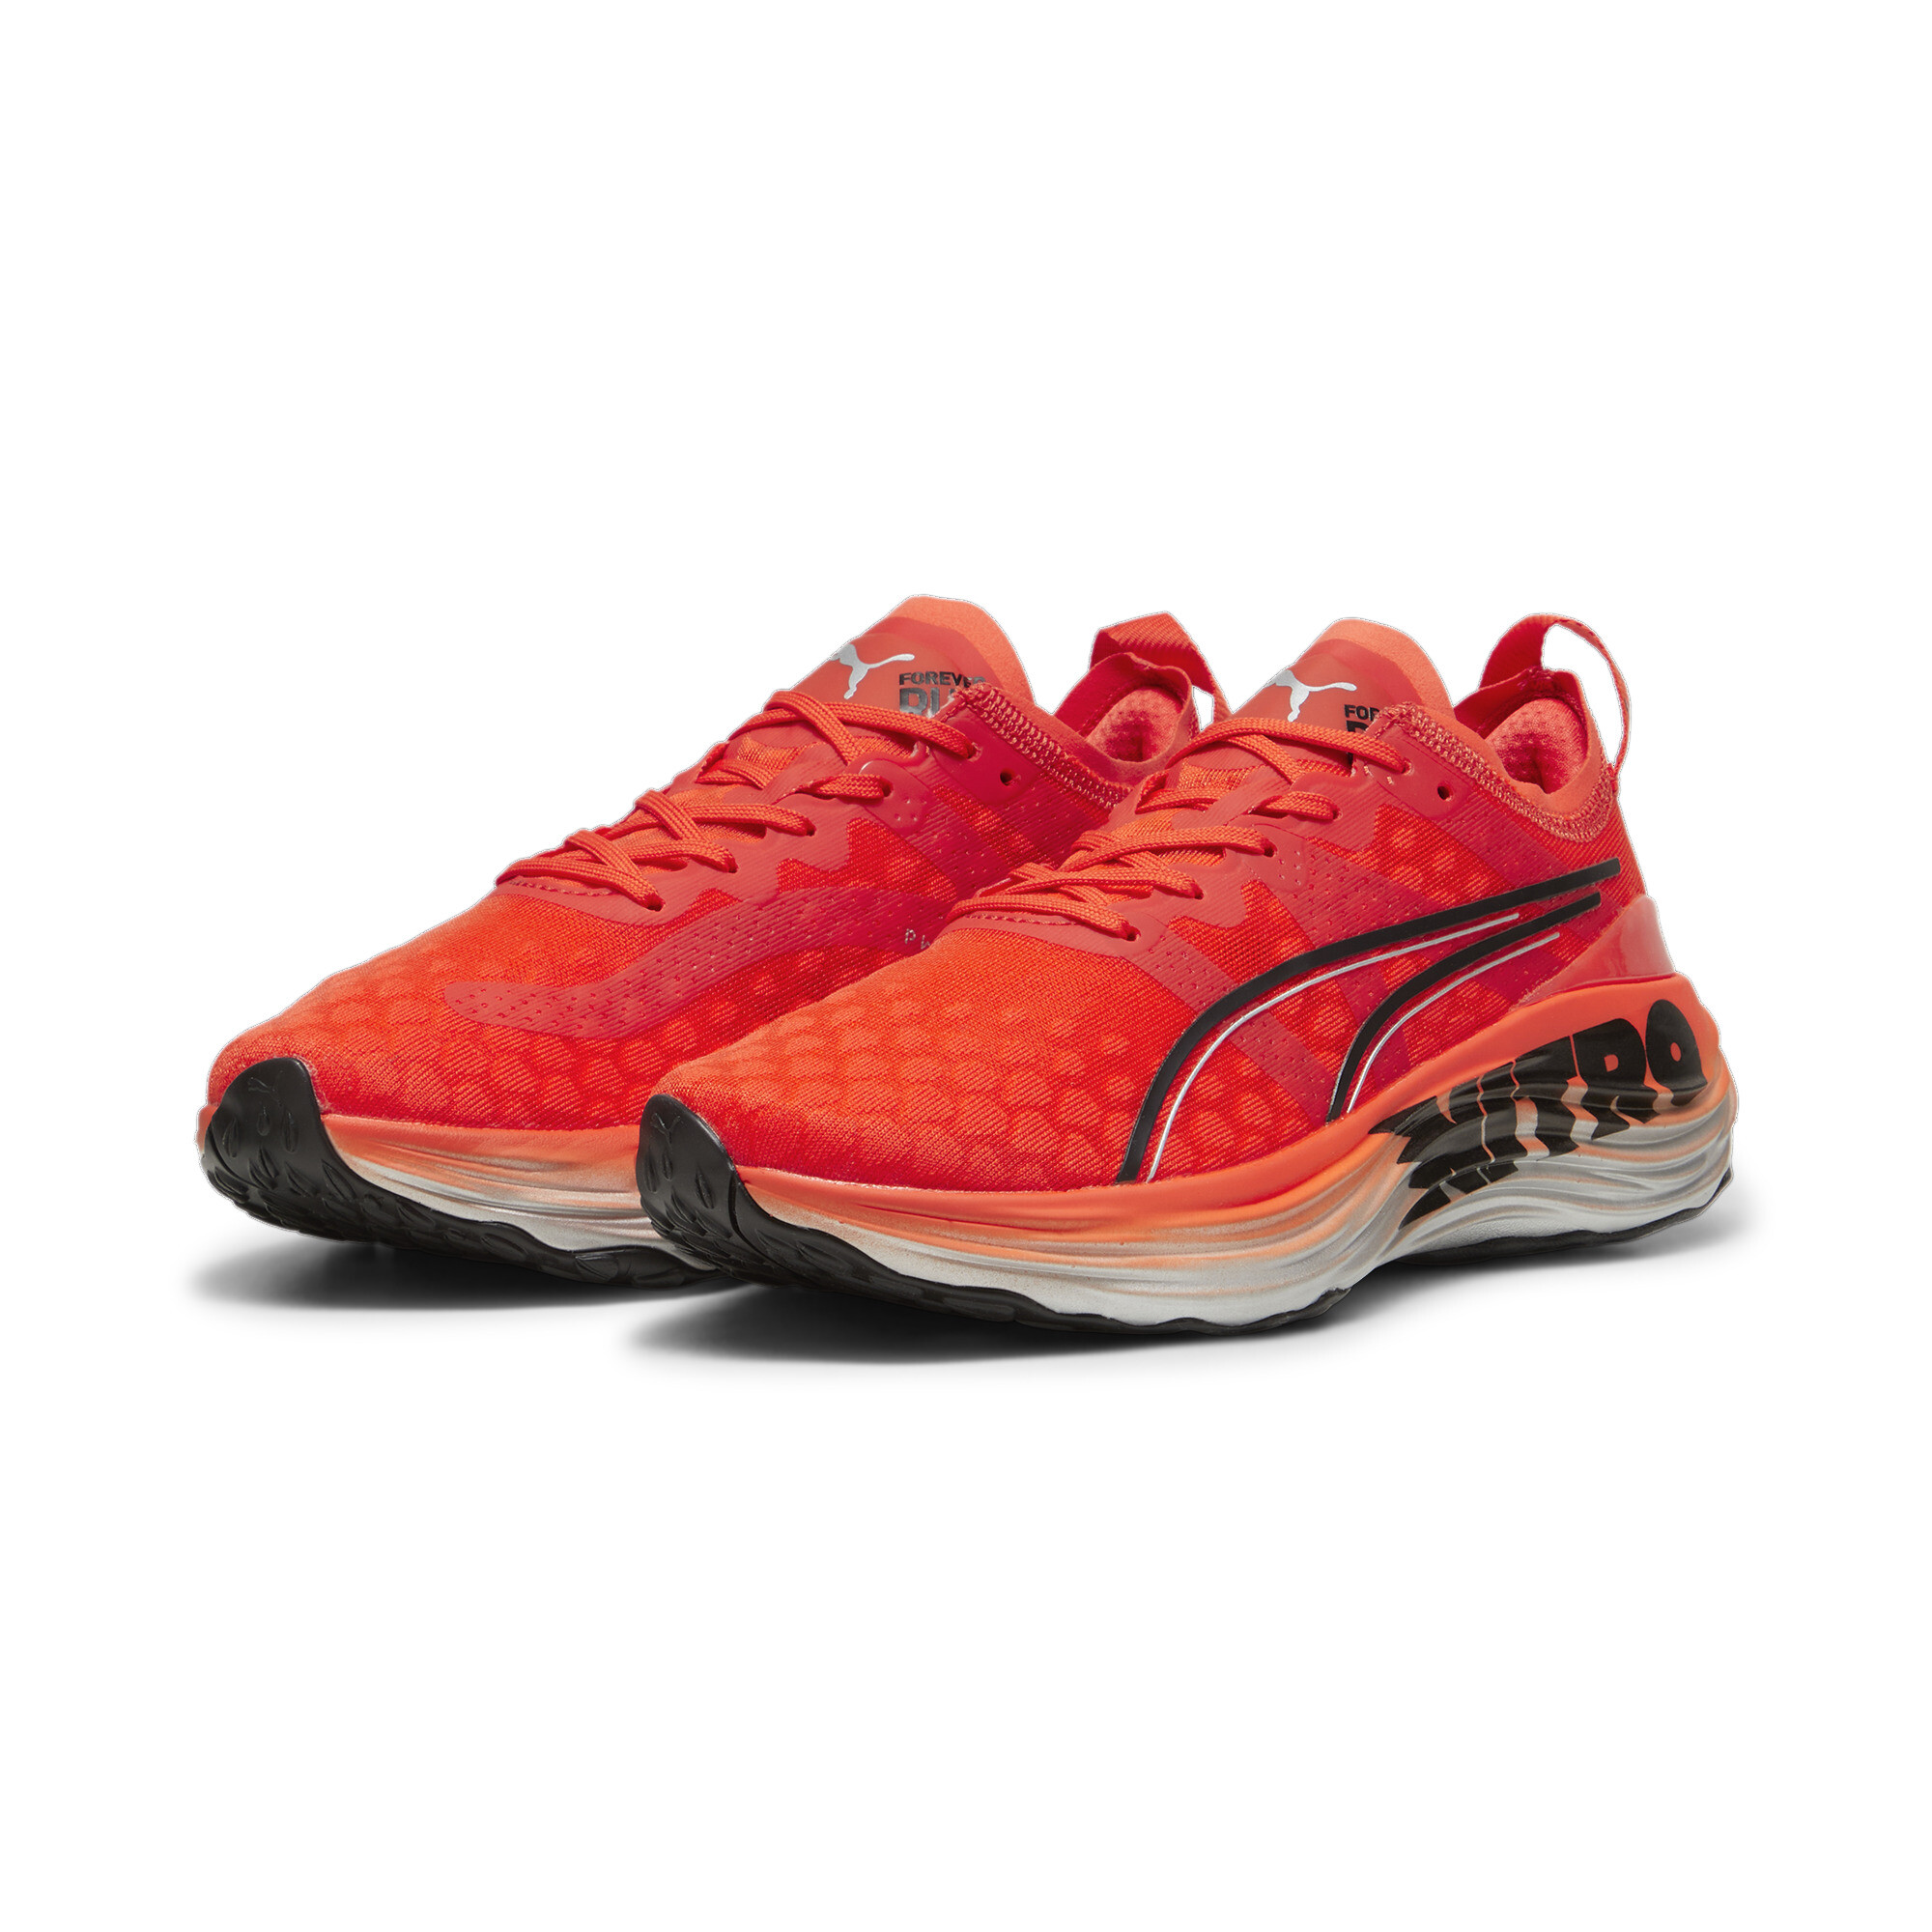 Women's Puma Forever Run NITRO's Running Shoes, Red, Size 36, Shoes